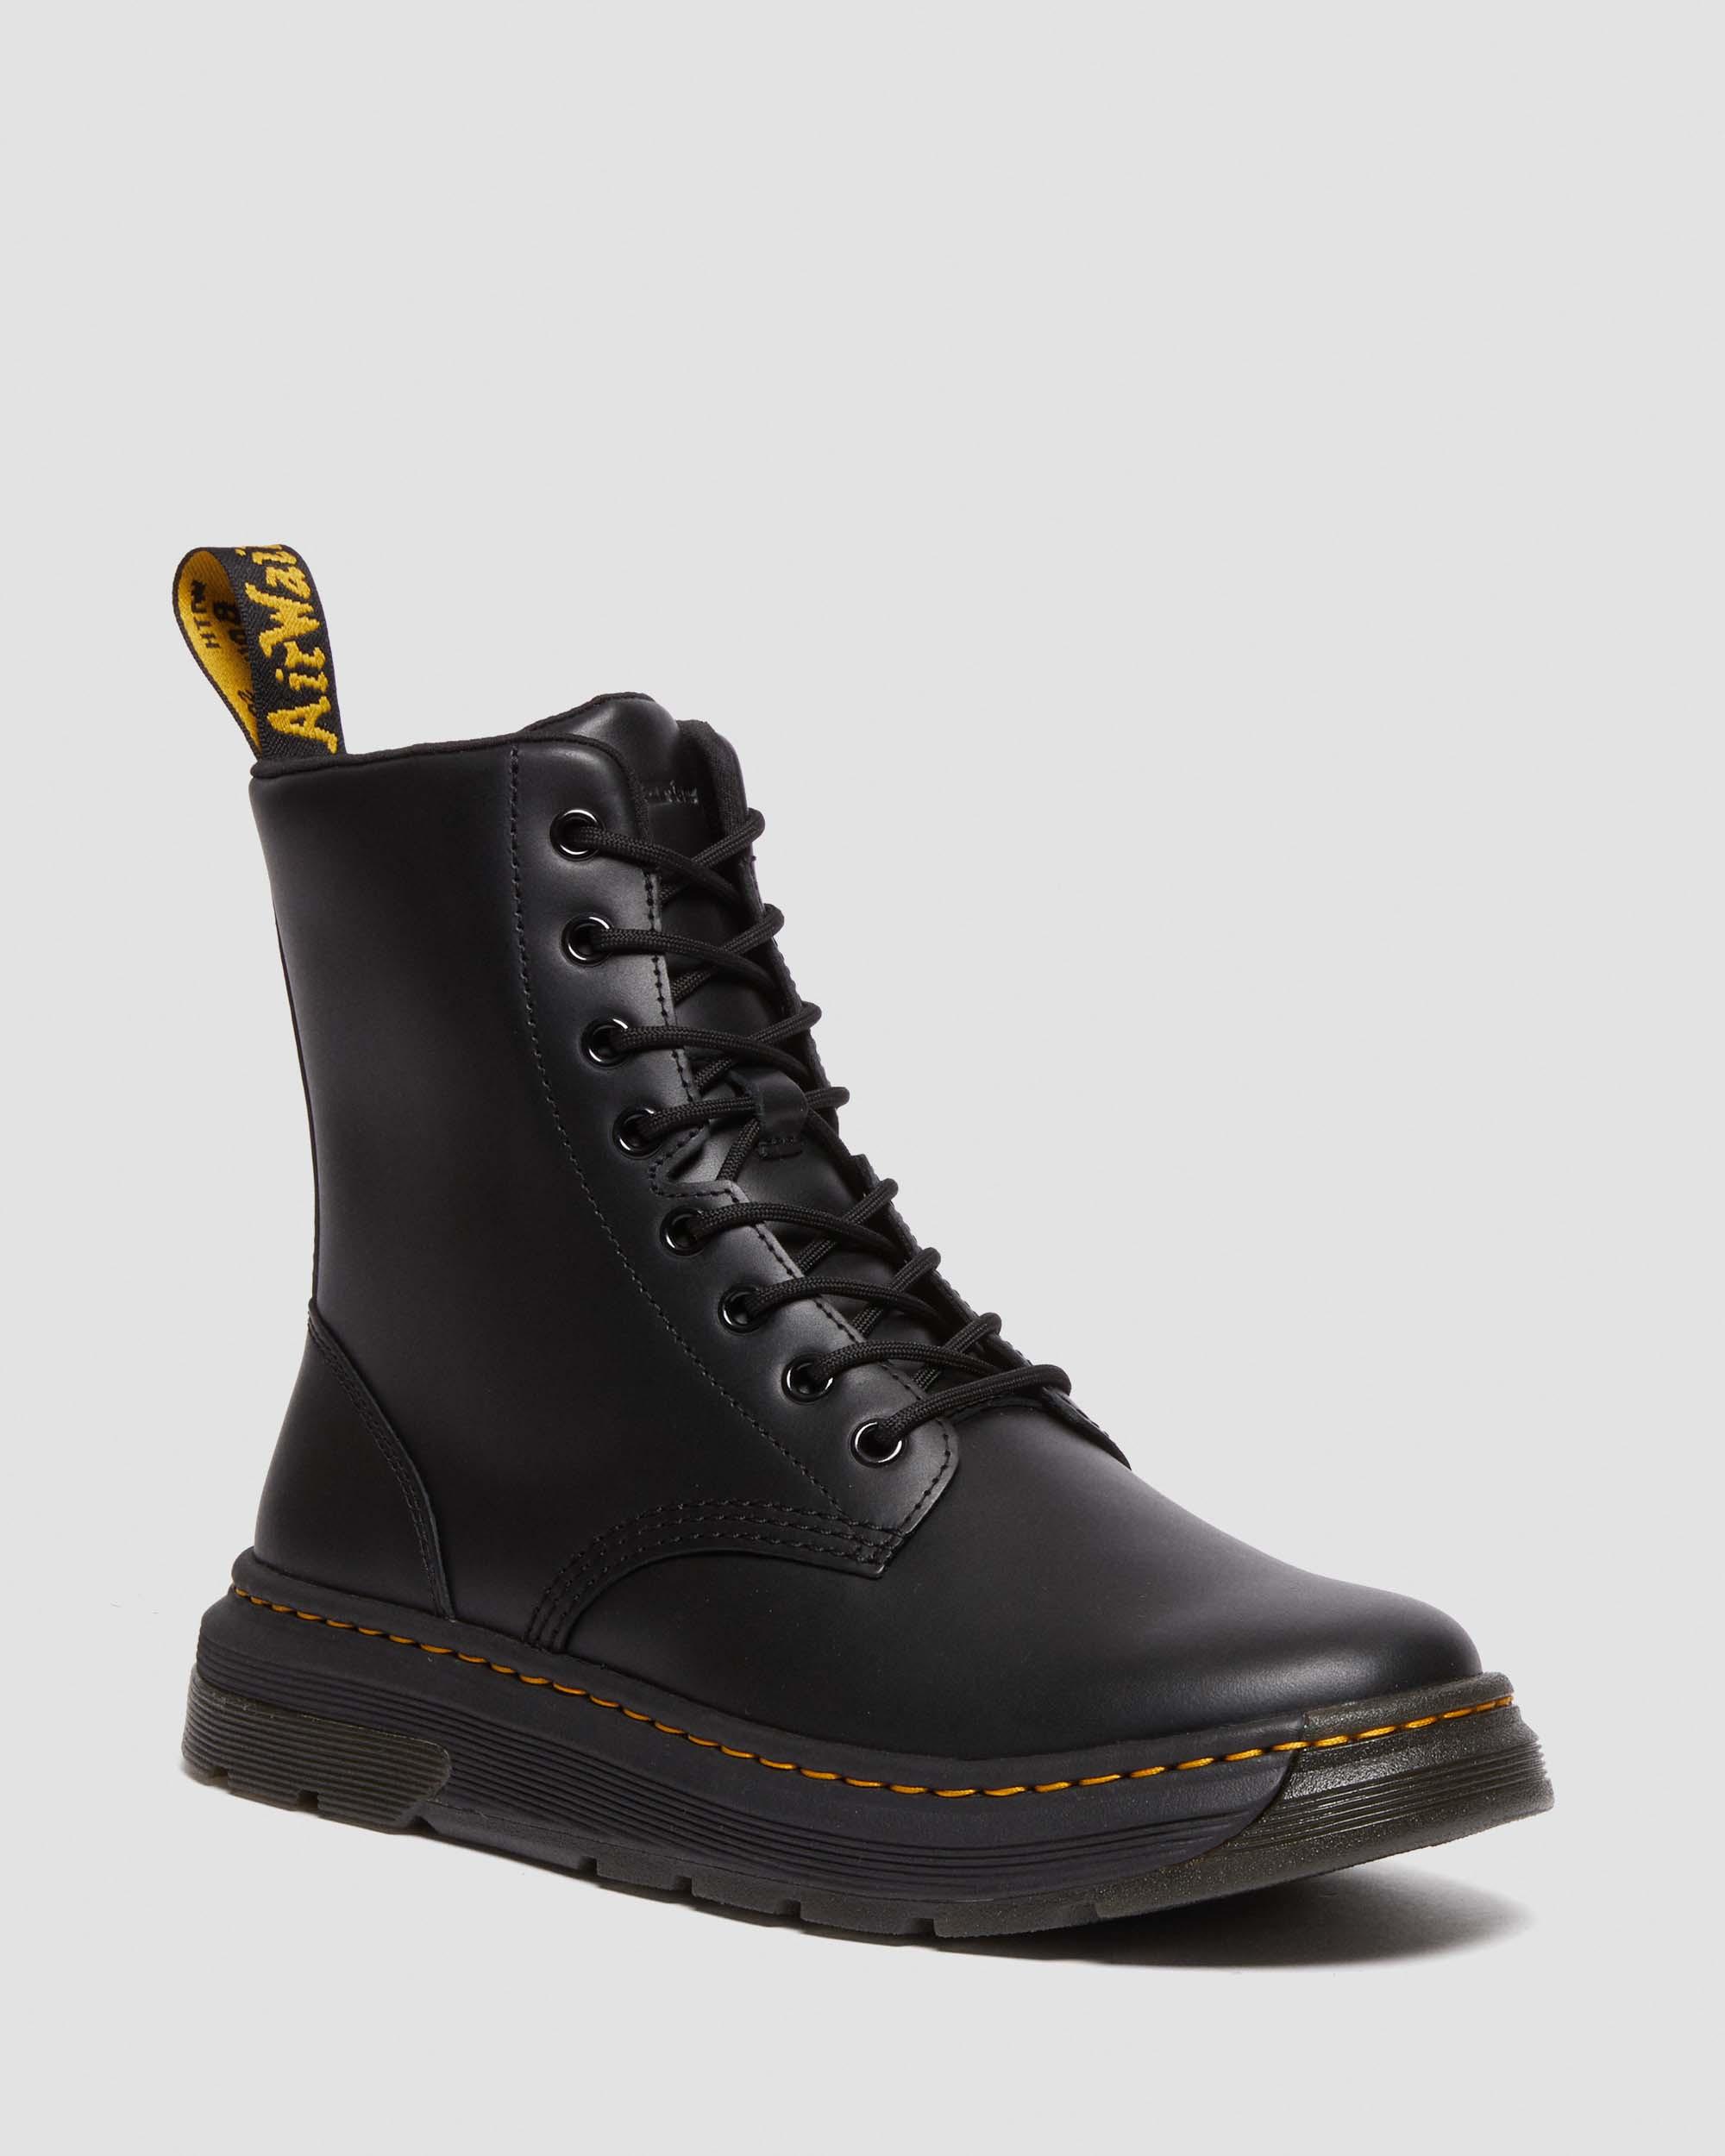 Crewson Classic Leather Everyday Boots in BLACK